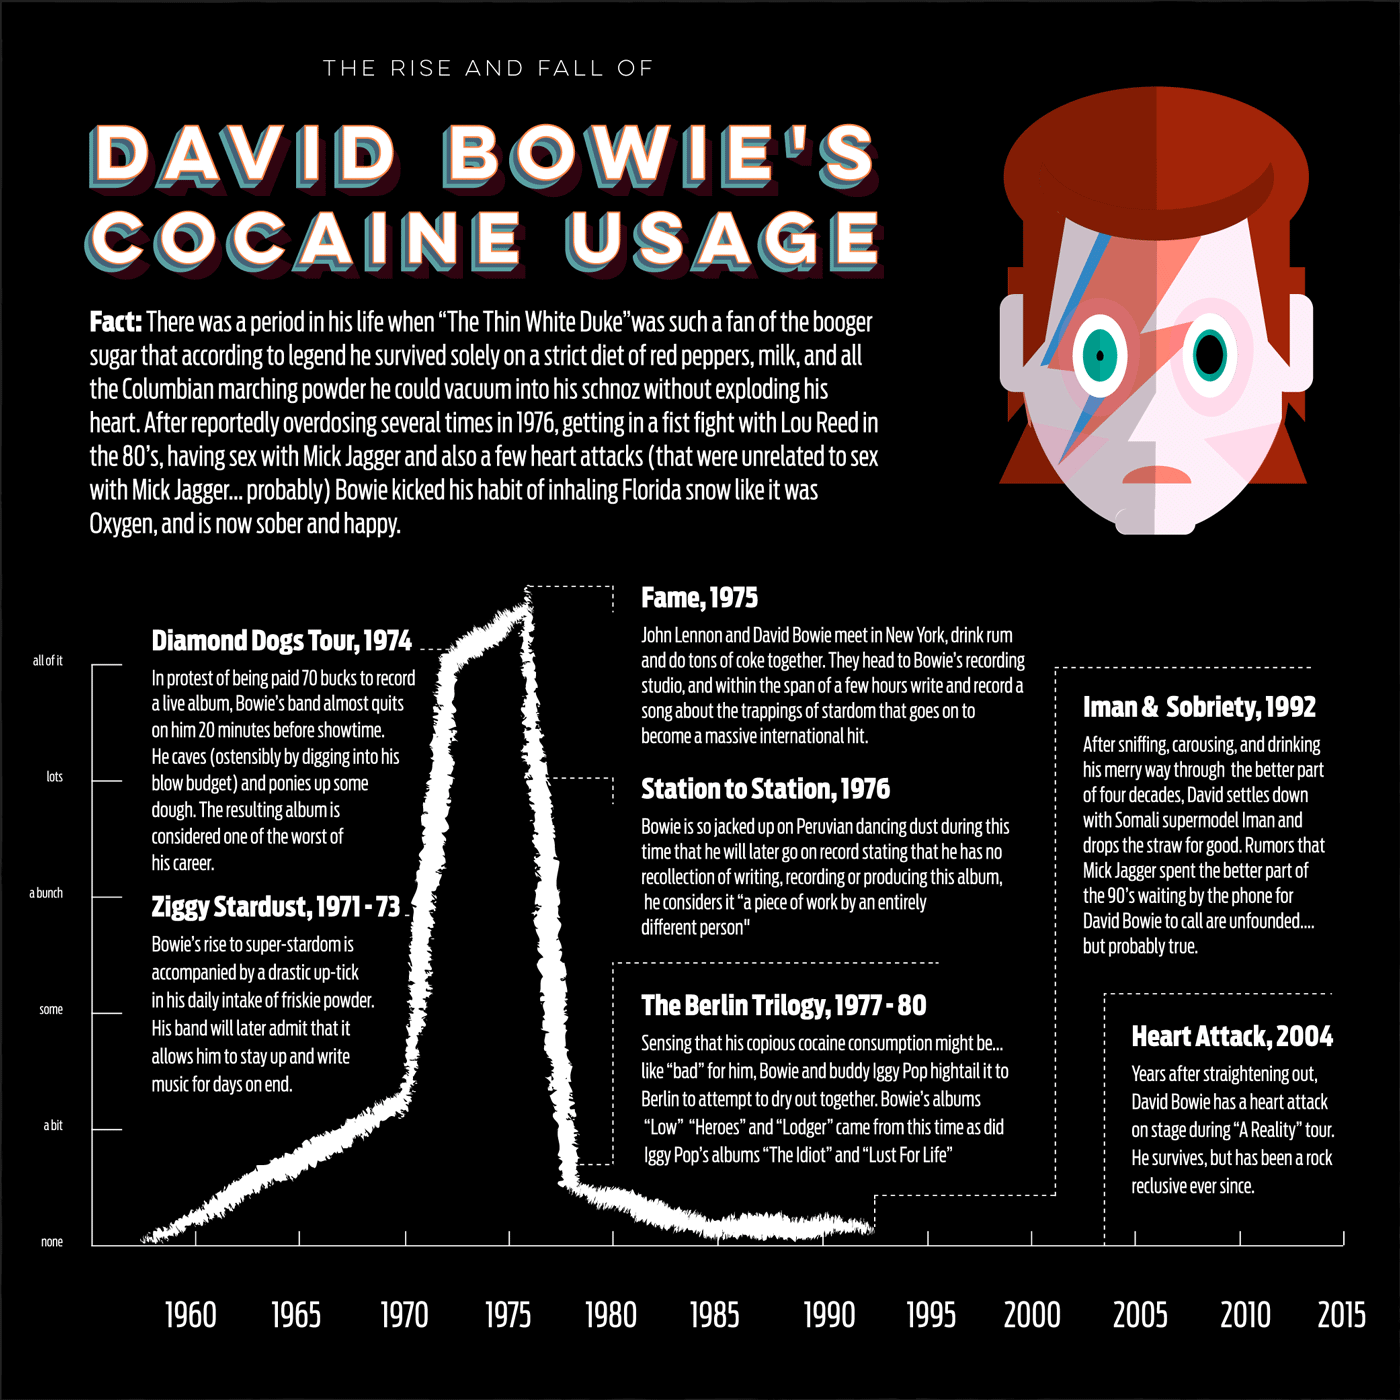 THE RISE AND FALL OF DAVID BOWIE’S COCAINE USAGE Infographic